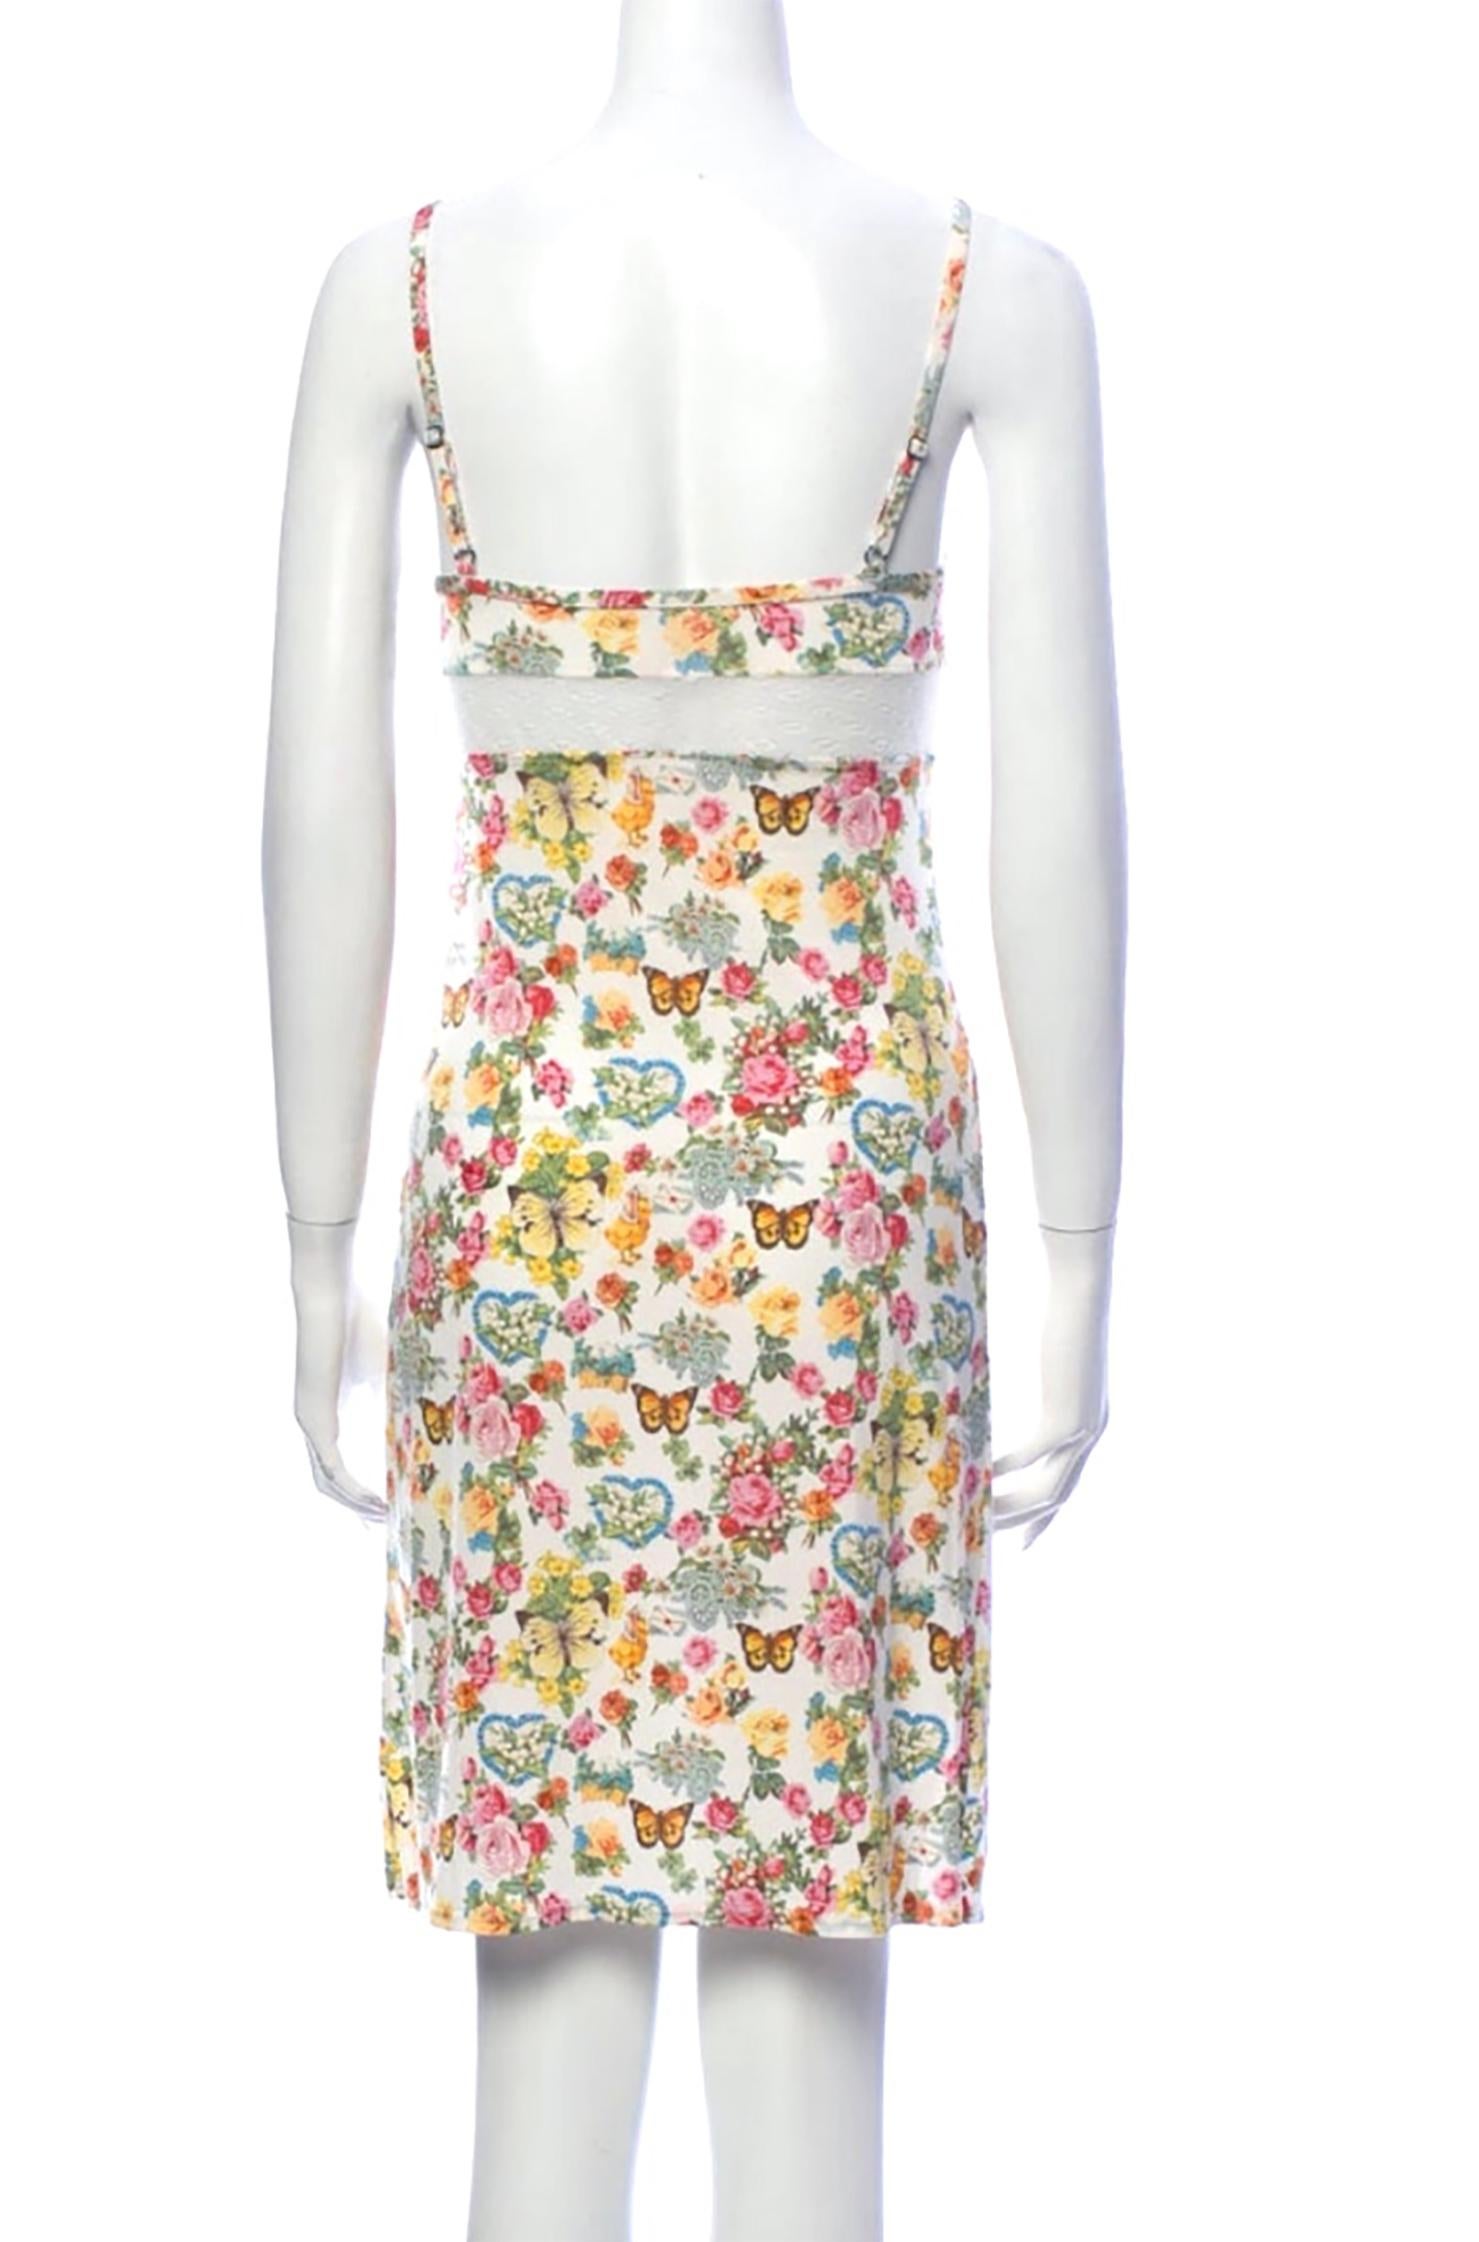 Christian Dior floral slip dress with lace insert, has stretch. Synthetic blend fabric.  Condition: Excellent. Size XS, FR 34, US 2

29